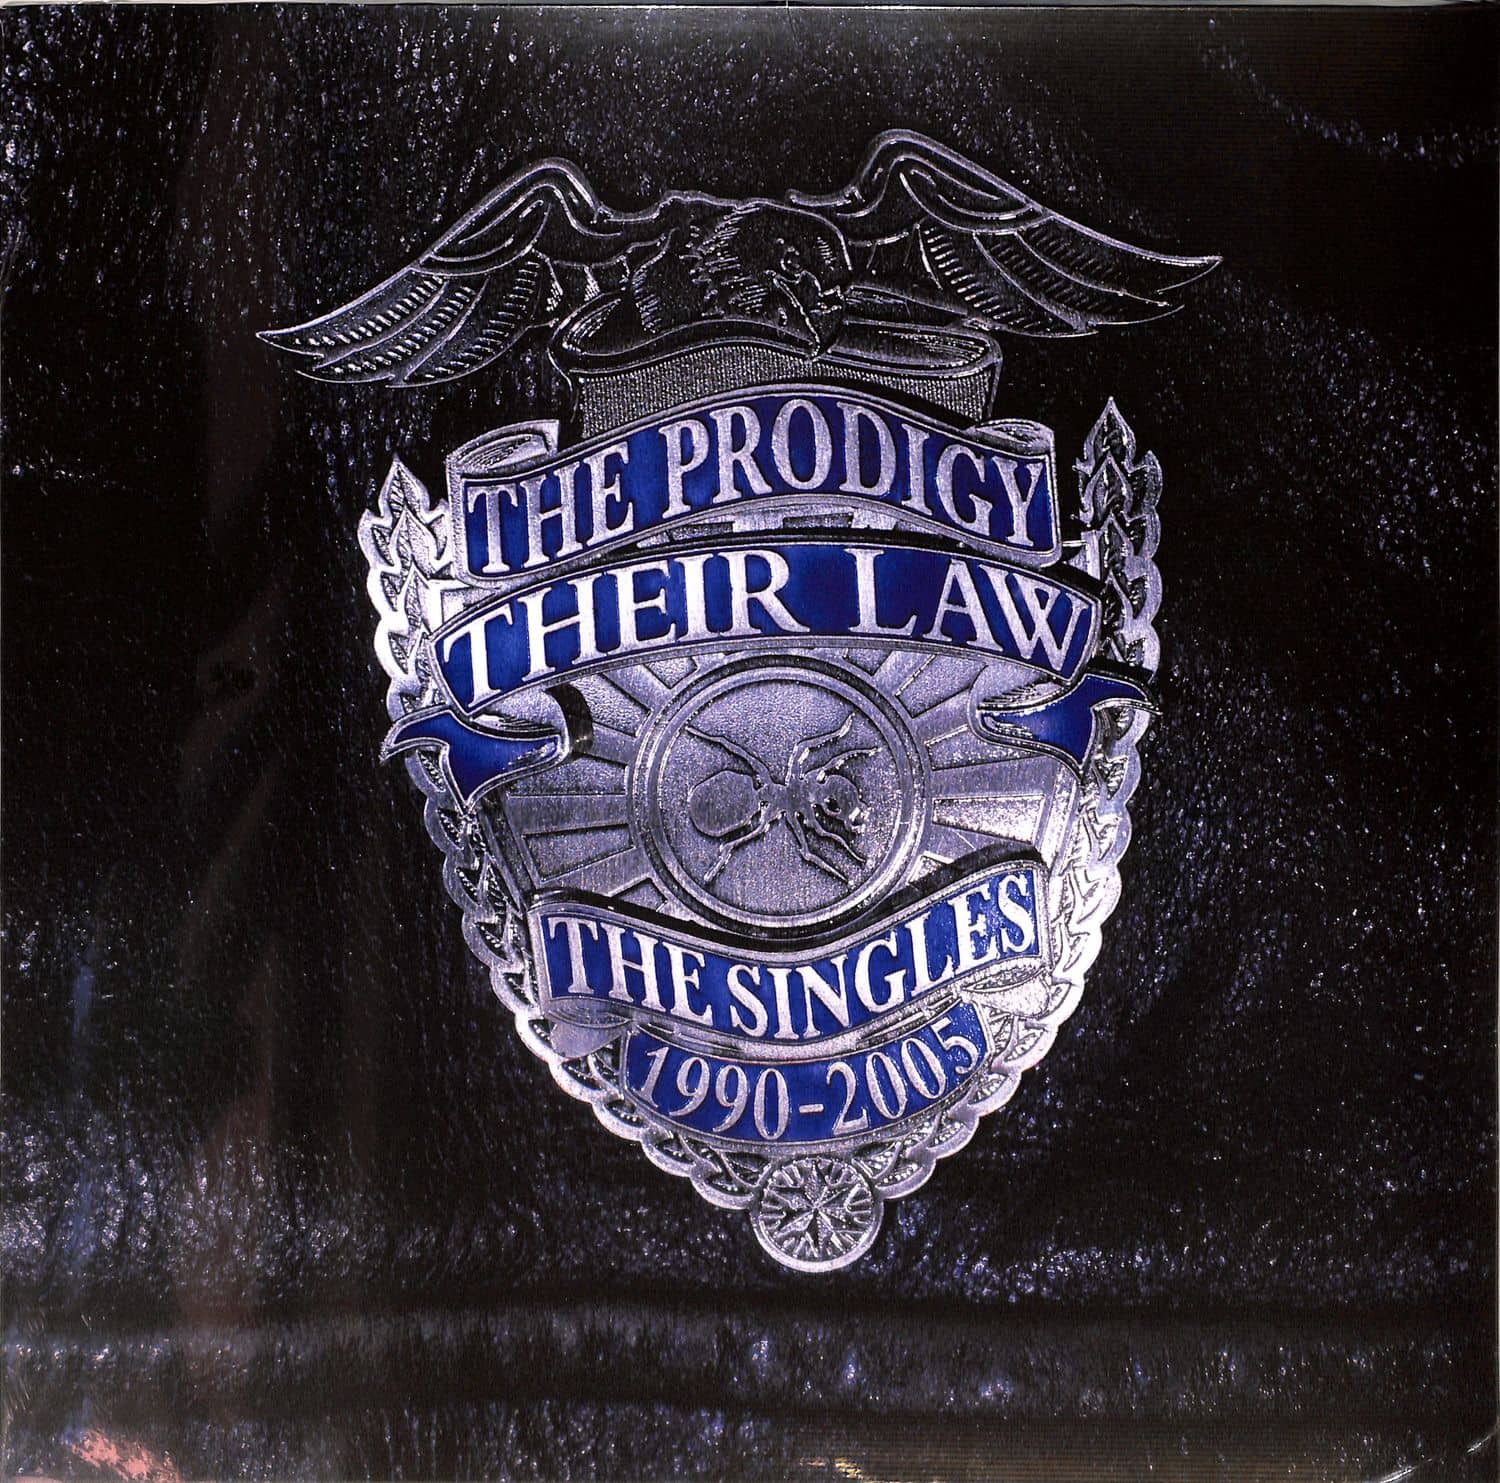 The Prodigy - THEIR LAW: SINGLES 1990-2005 